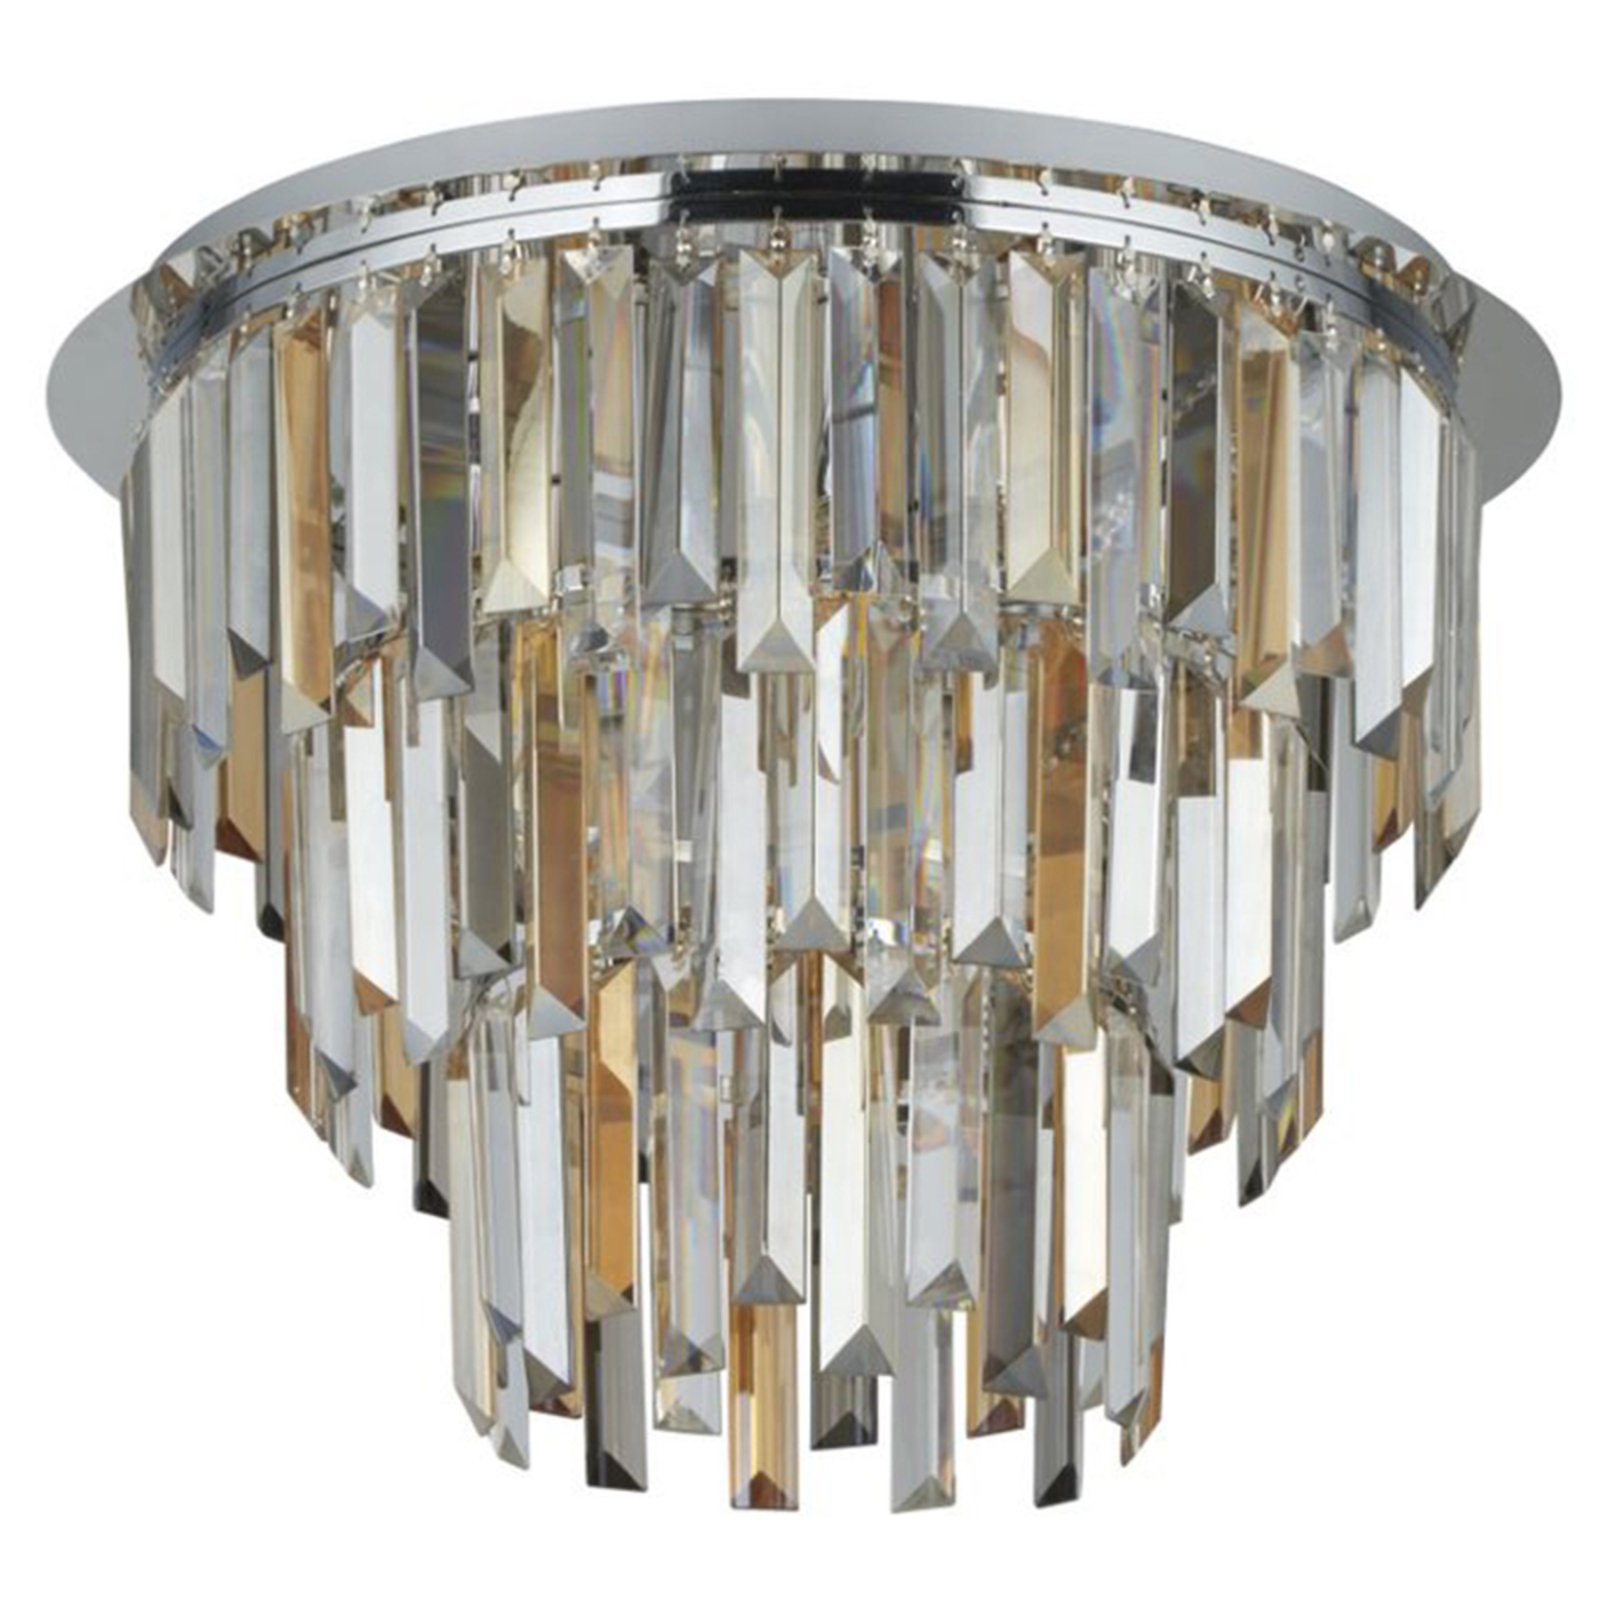 Clarissa ceiling light with crystals